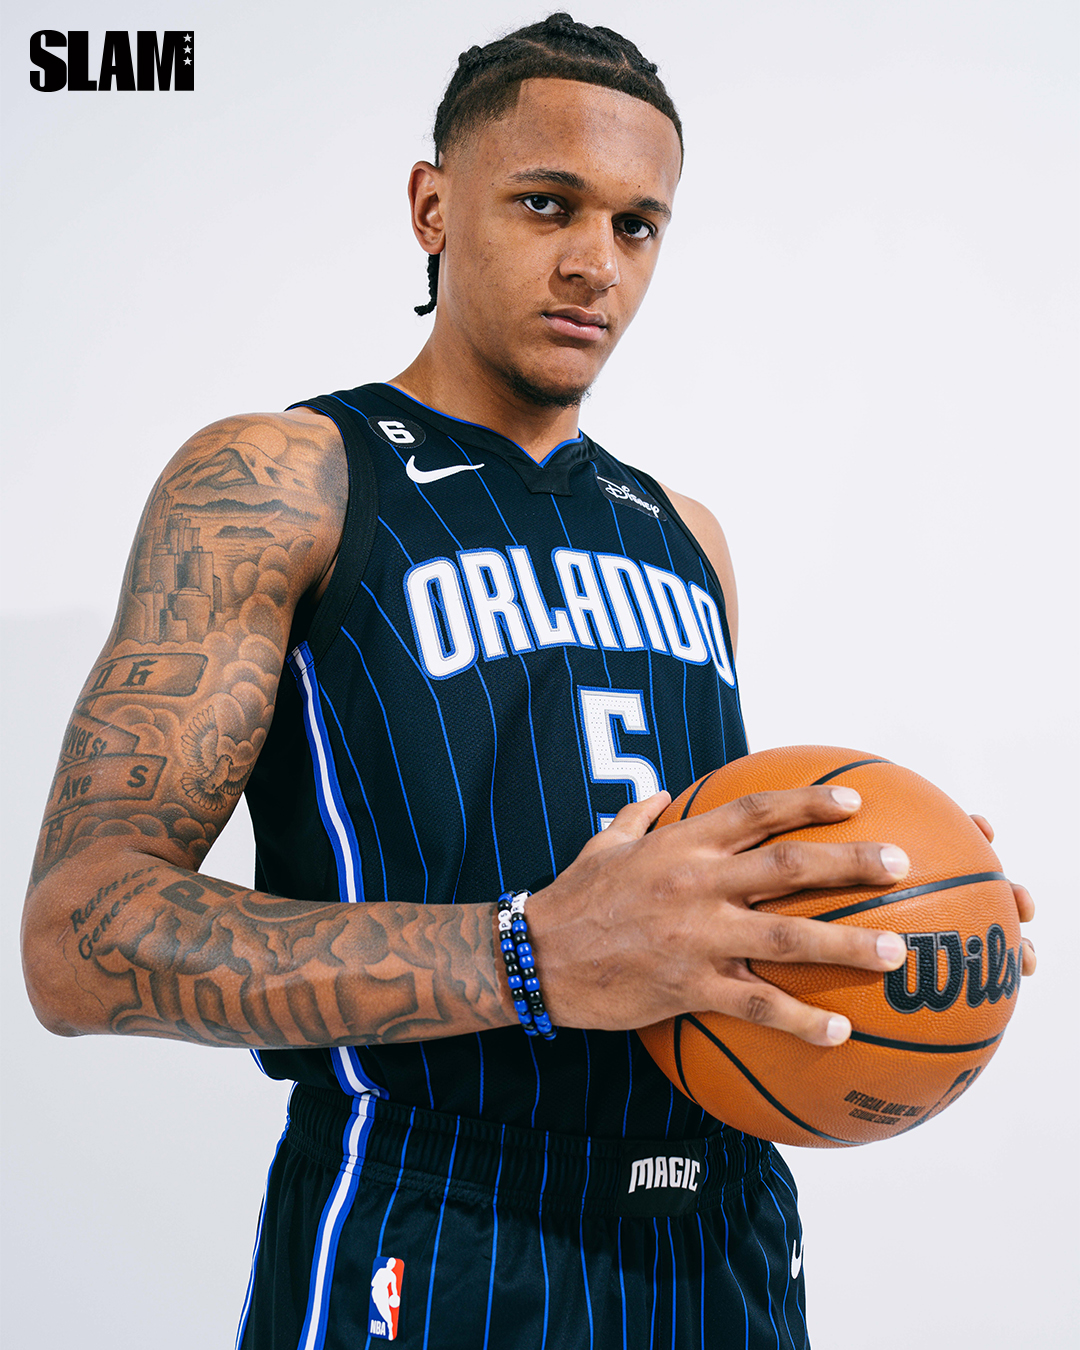 Paolo Banchero is the Future and He’s Ready to Bring a Winning Culture to Orlando